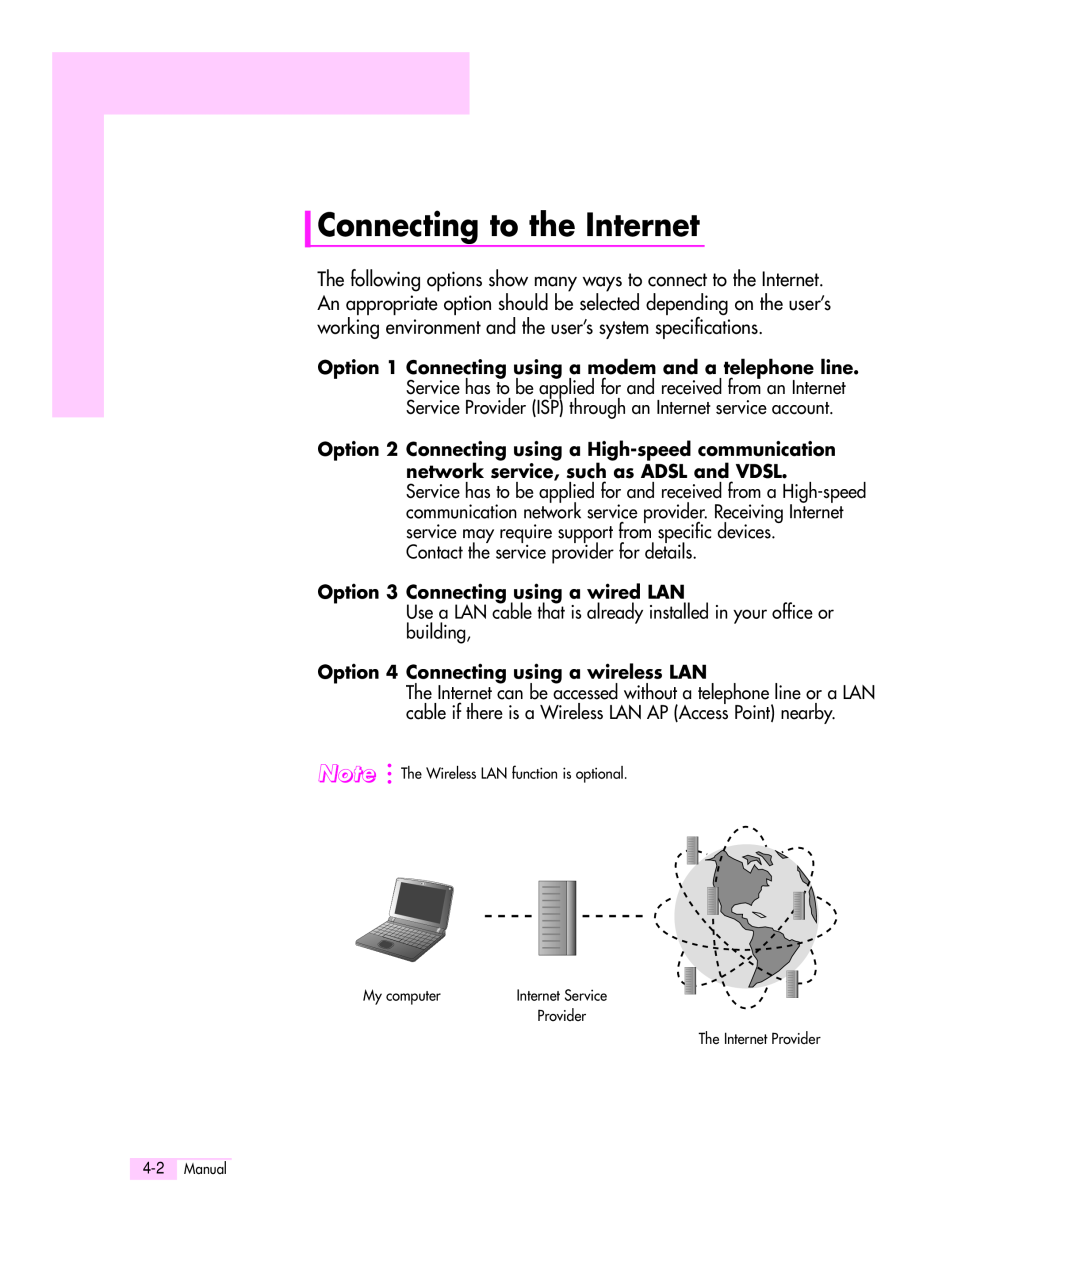 Samsung Q35 Connecting to the Internet, Contact the service provider for details, Option 3 Connecting using a wired LAN 